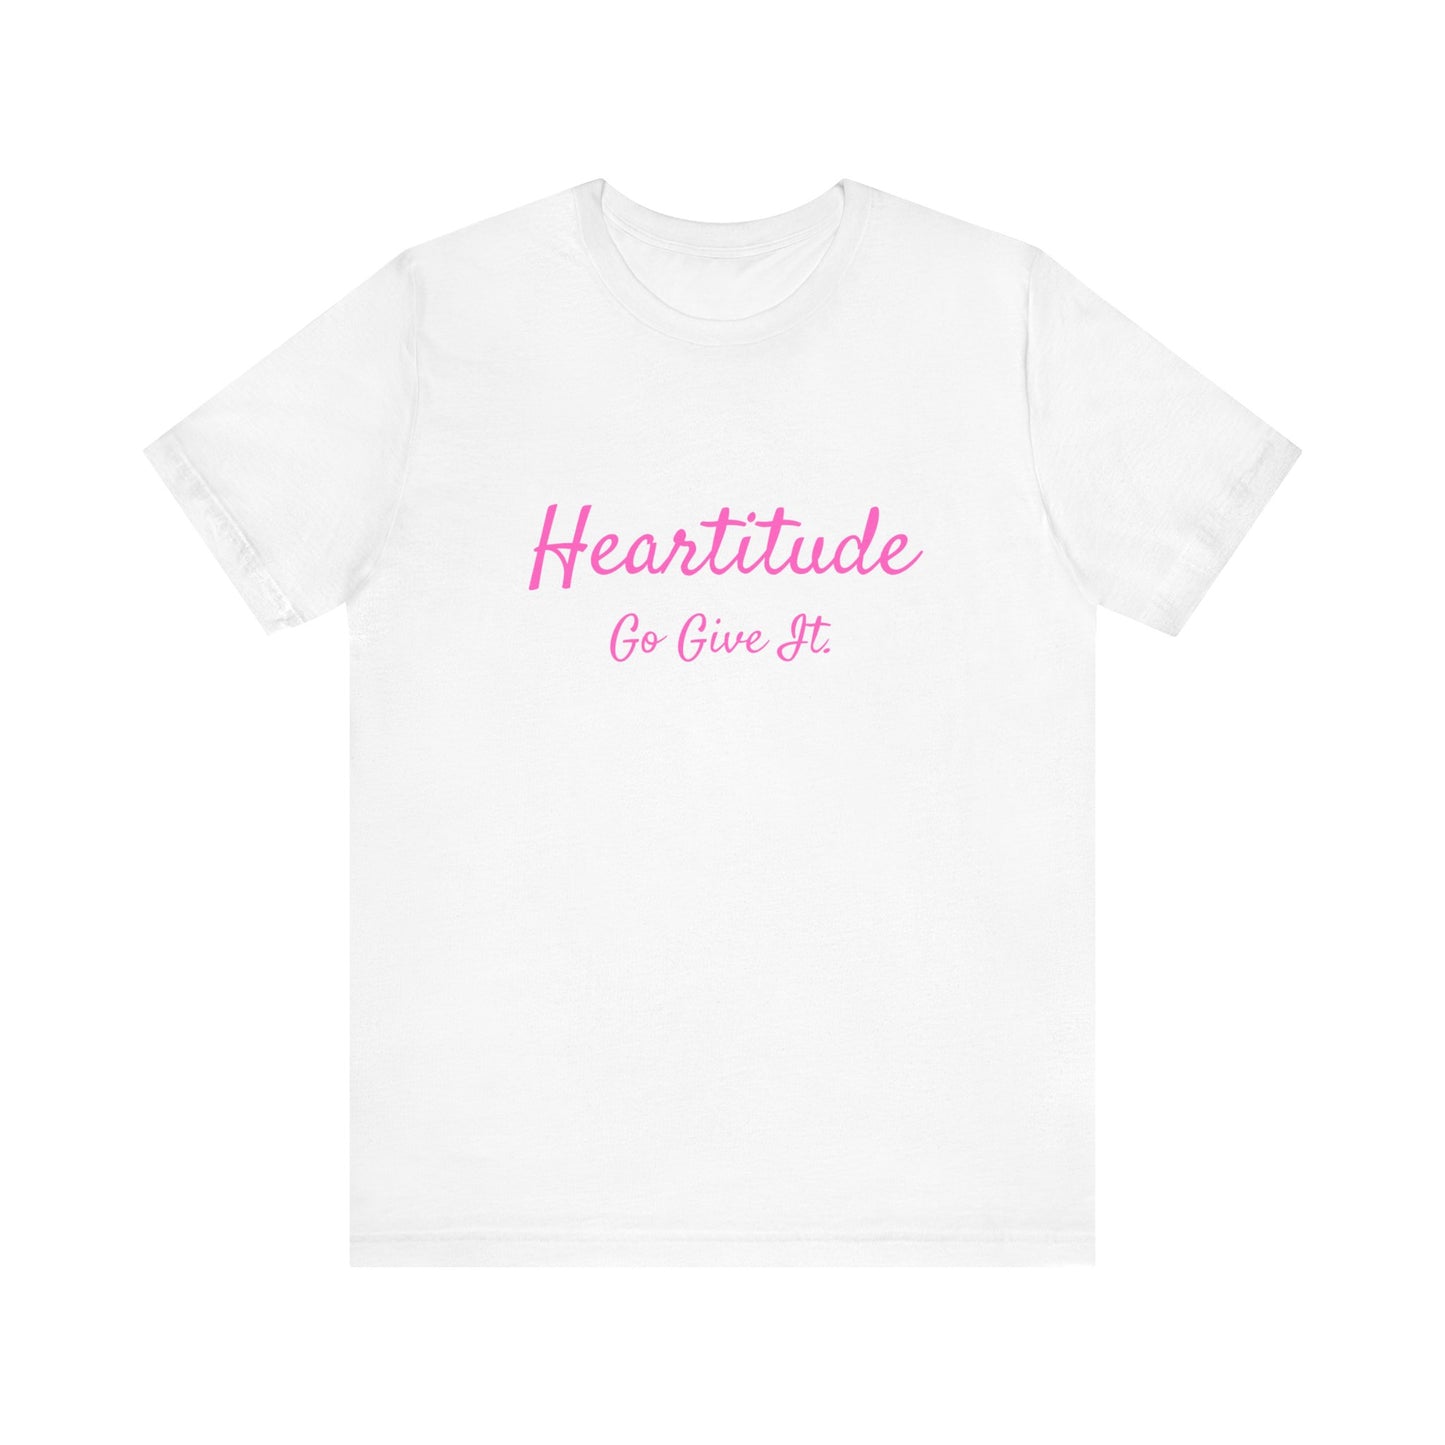 Heartitude: Go Give It In Pink Script Woman's T-shirt (50% to charity)